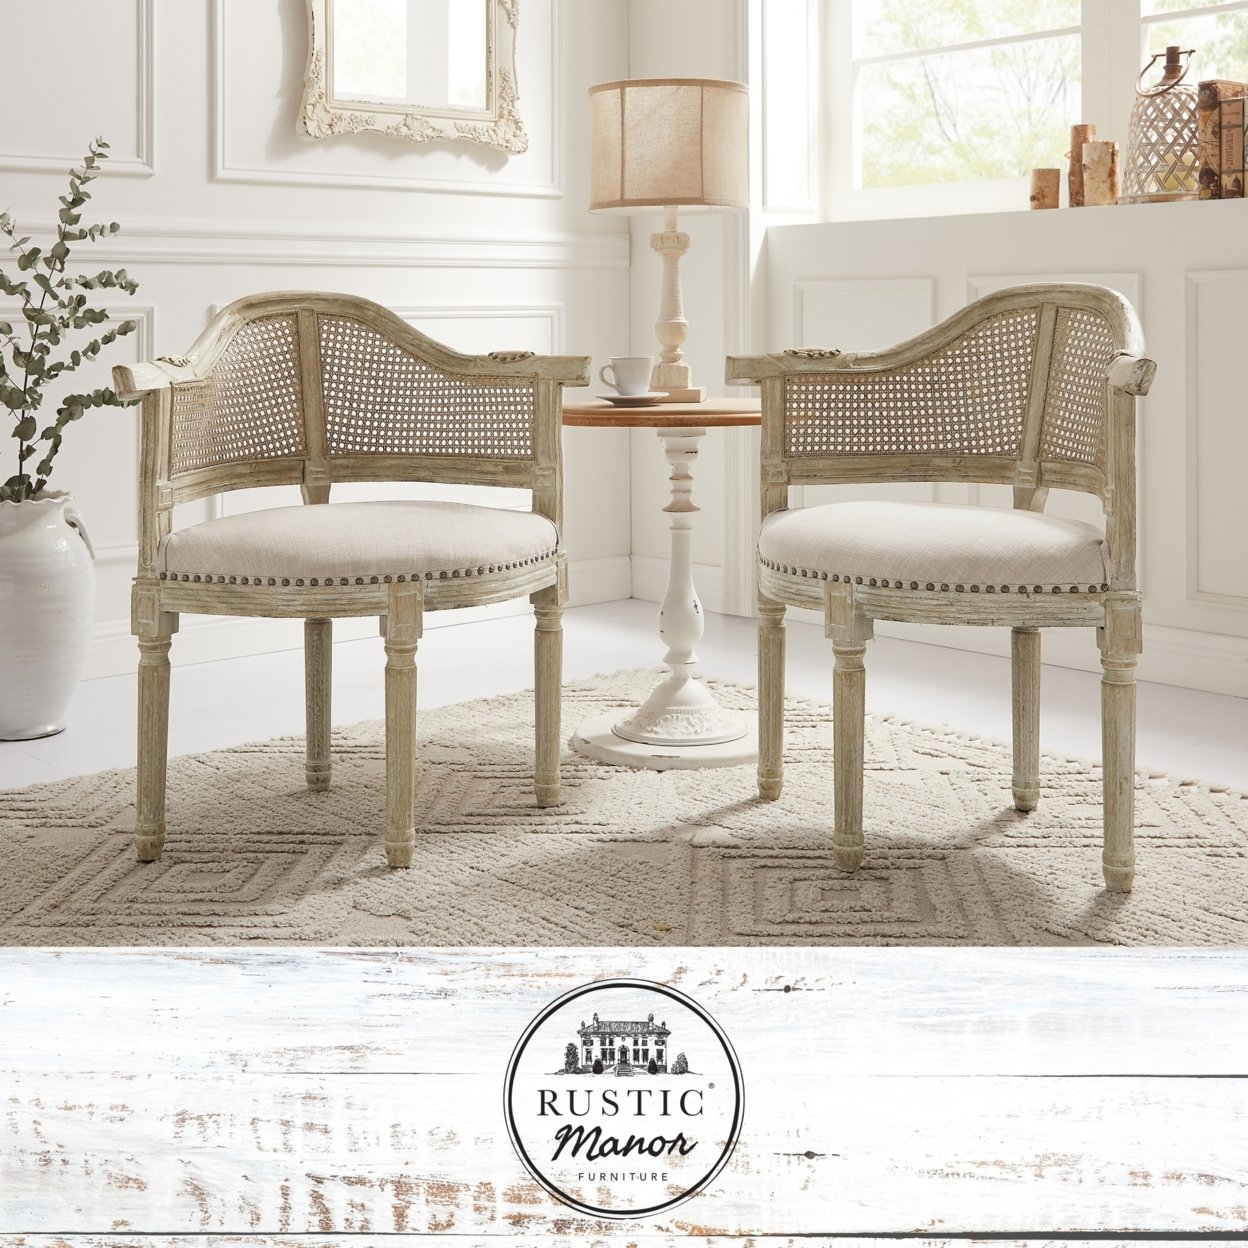 Arius Accent Chair - Upholstered, Nailhead Trim , Rattan Imitation, Curved Back , Antique Brushed Wood Finish - Navy